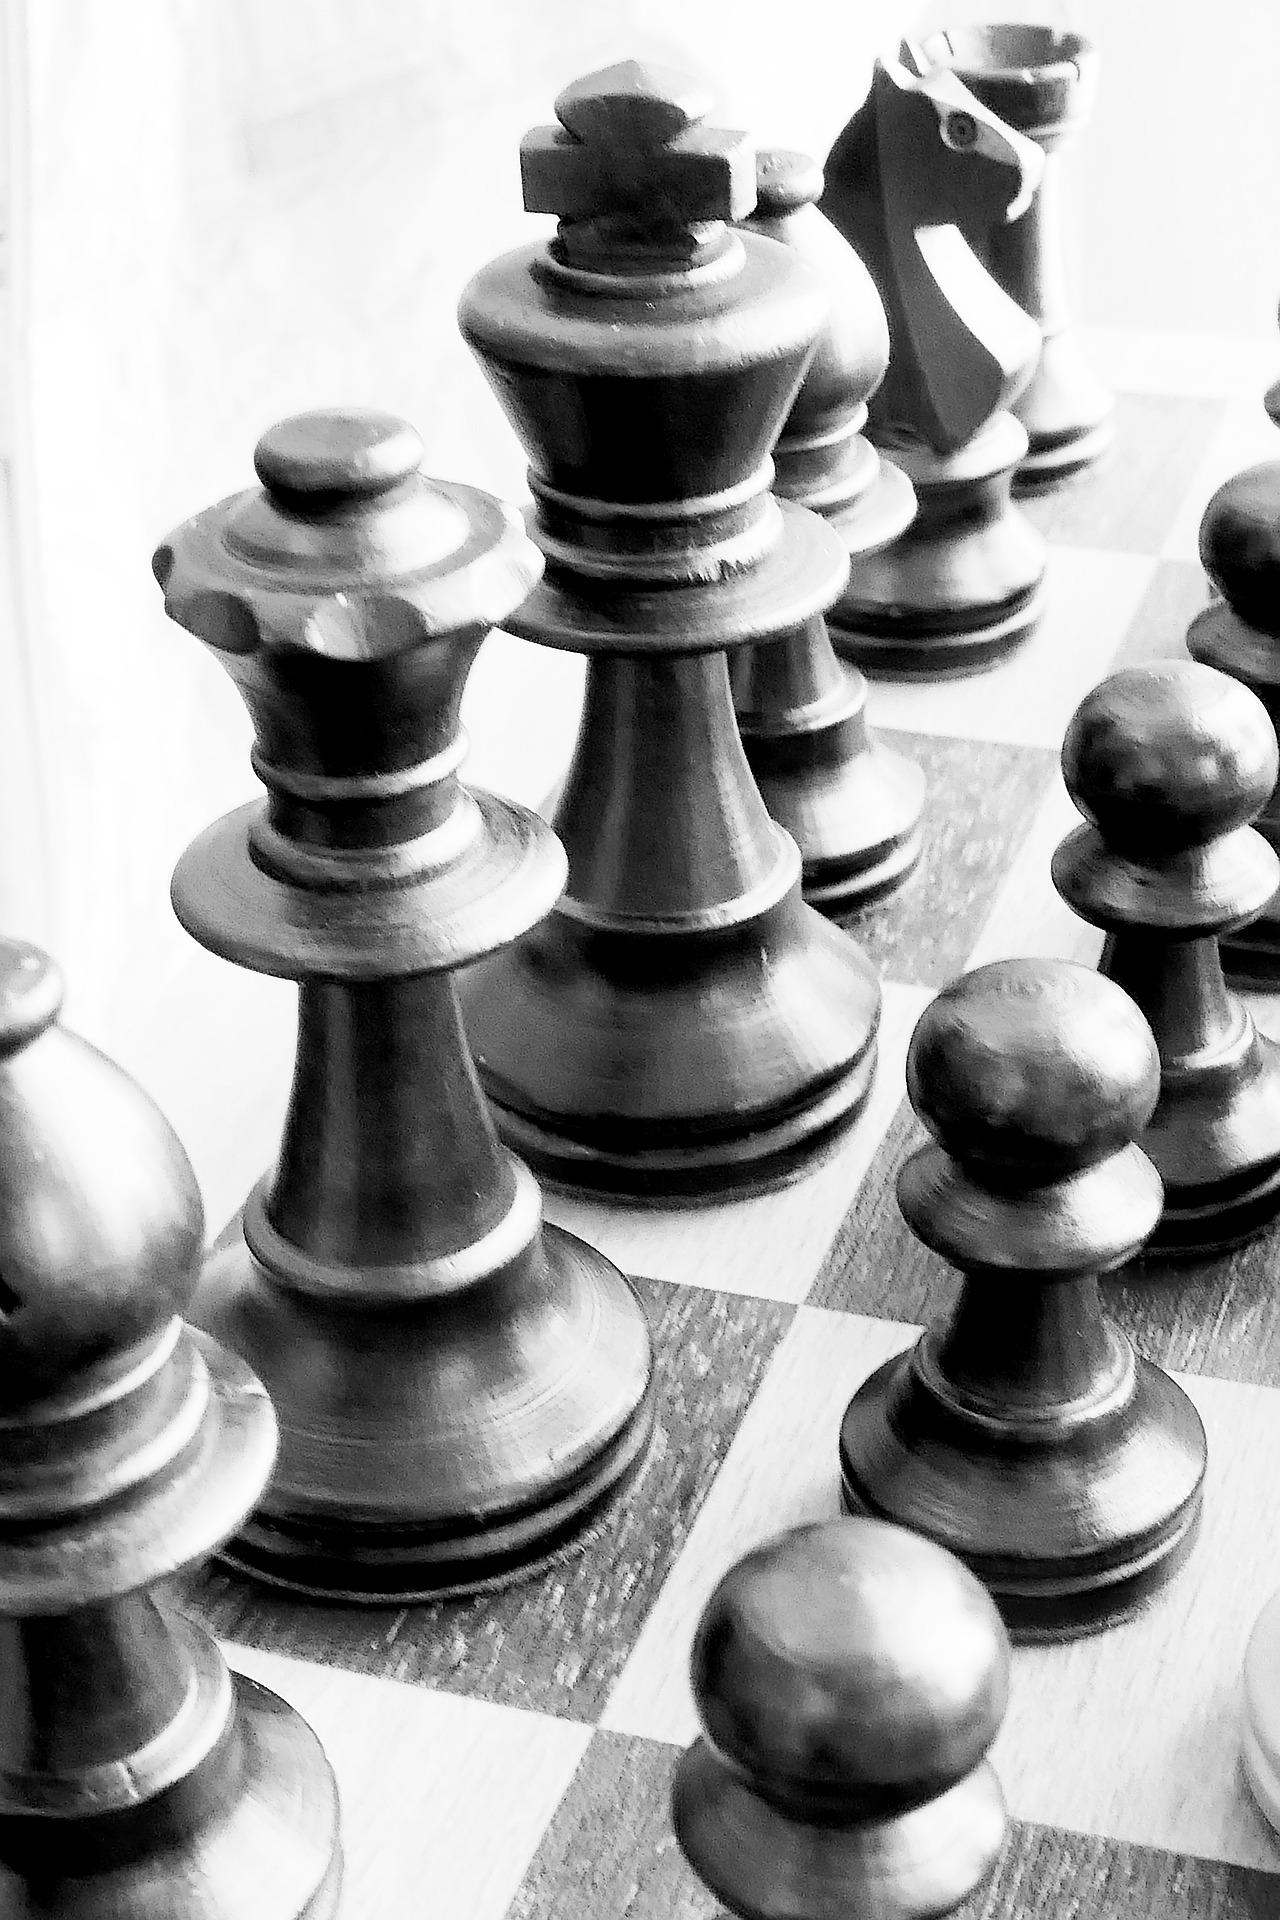 How To Set Up A Chessboard Easily: Placing The 6 Pieces